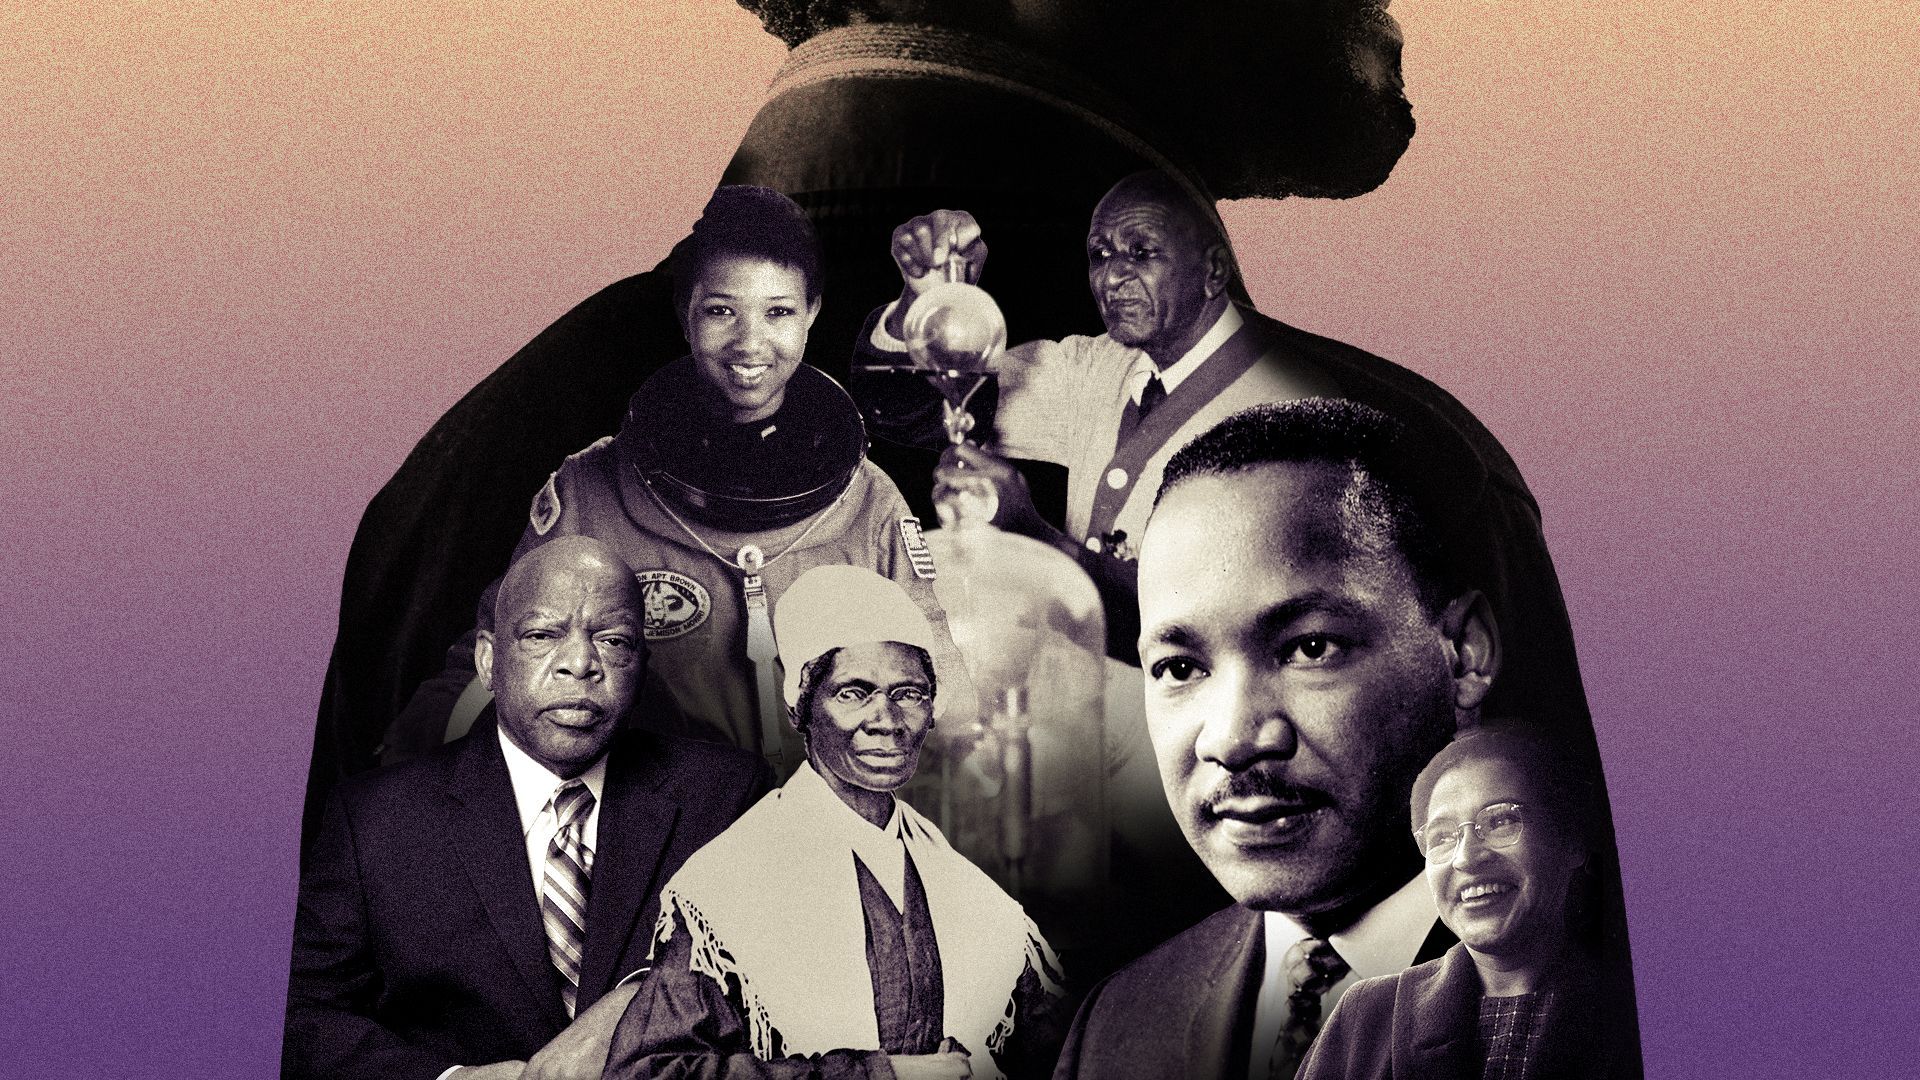 Photo illustration of Martin Luther King Jr., Rosa Parks, Sojourner Truth, John Lewis, Mae Jemison, and George Washington Carver within the silhouette of a young Black man.